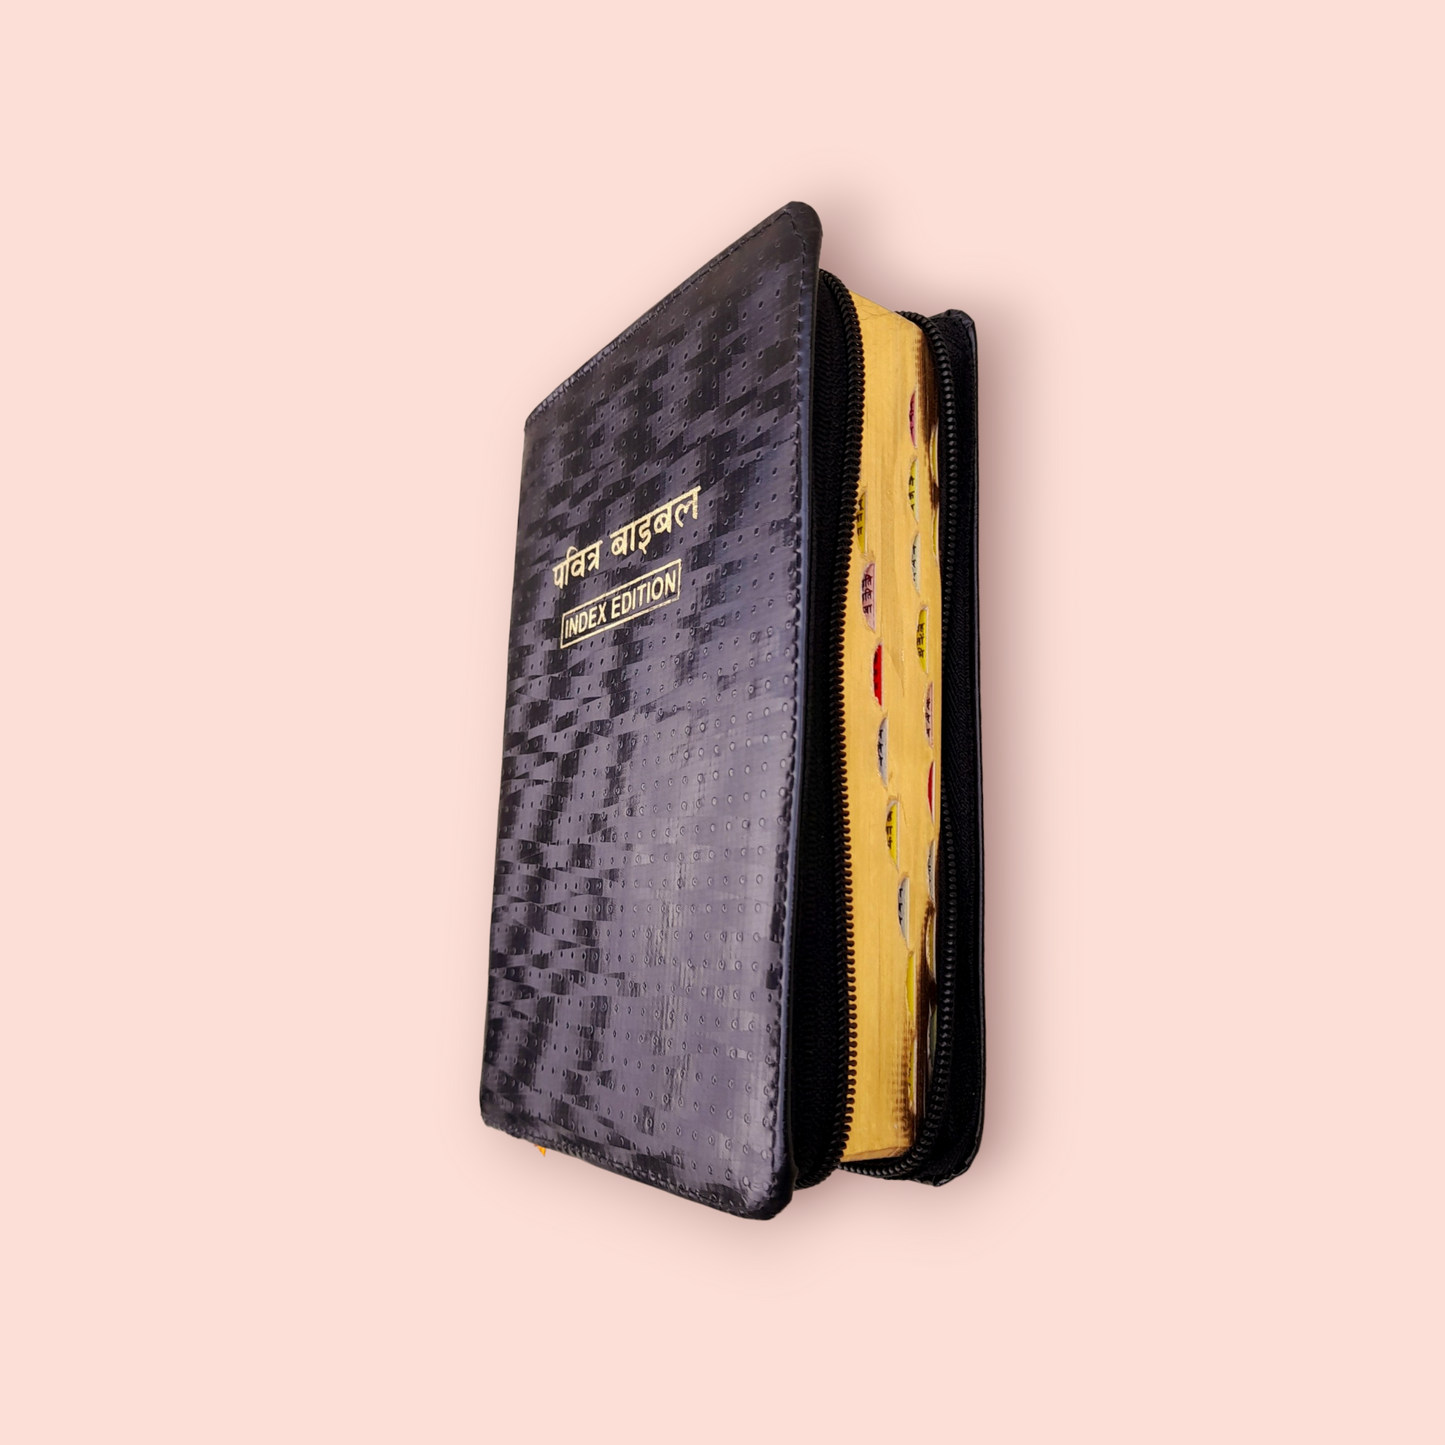 Small Hindi Bible With Thumb Index Black Color Bound